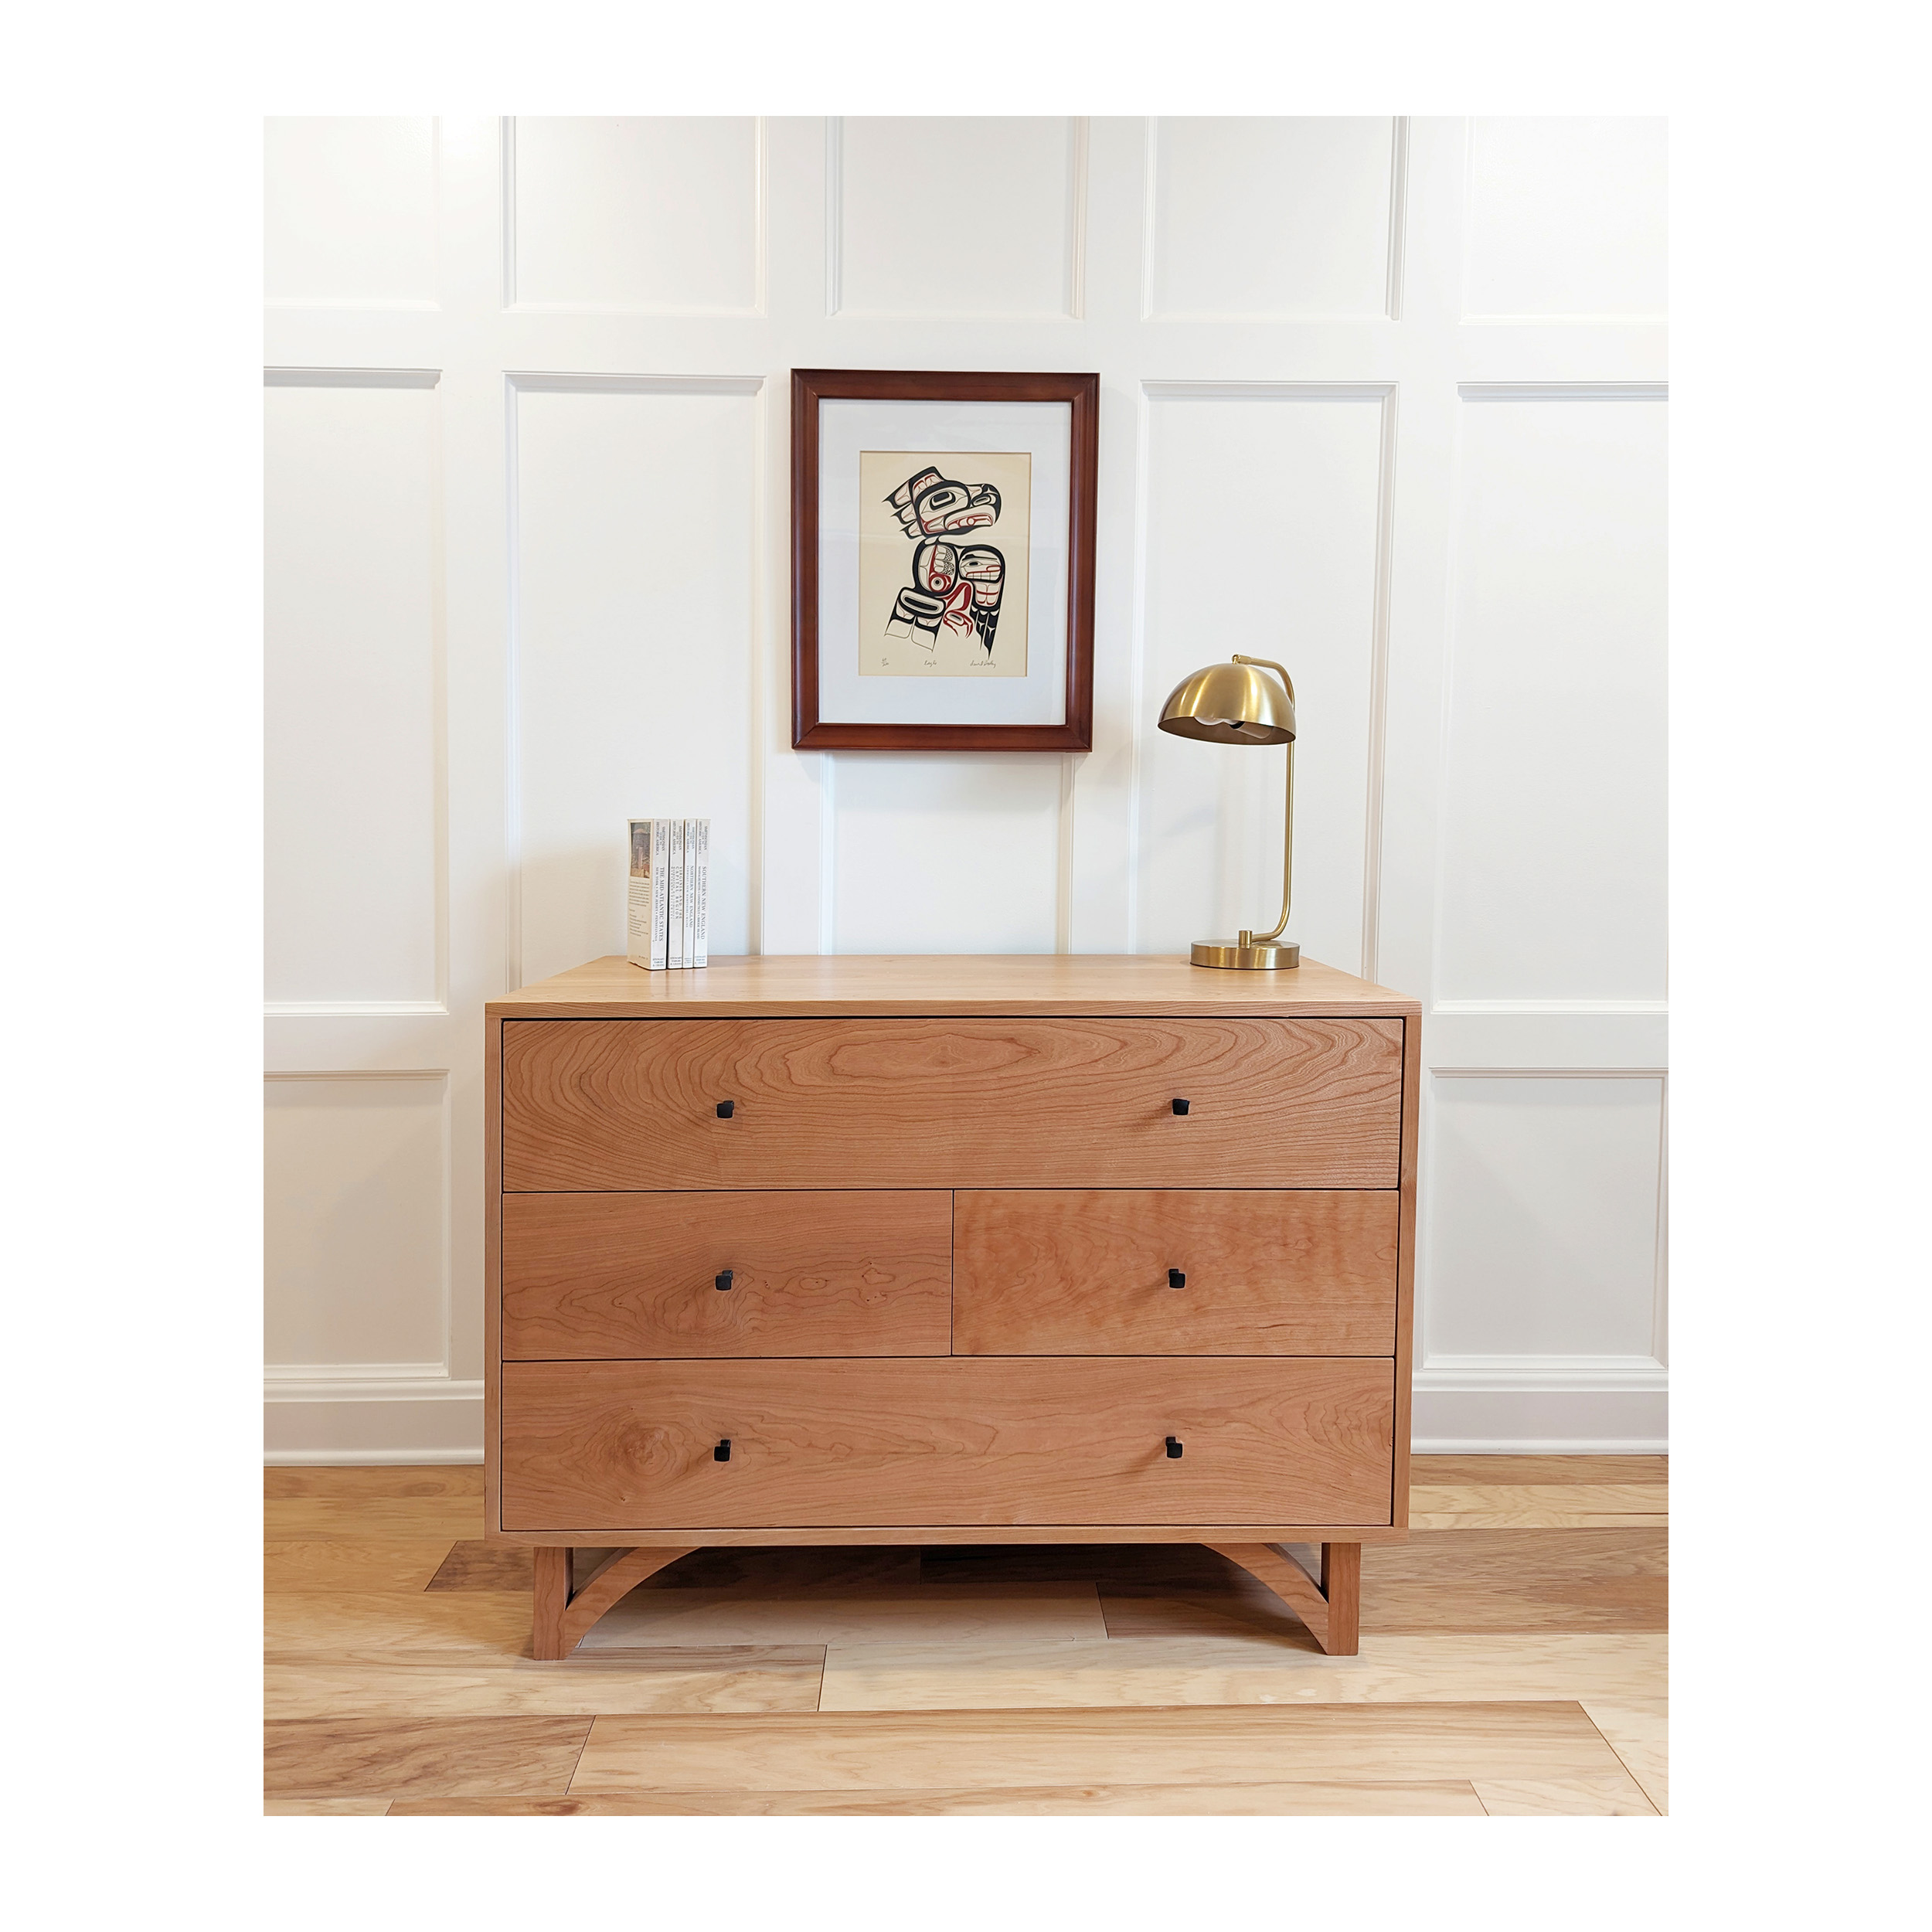 Series 454 Dresser With Four Drawers At 44″ In Width